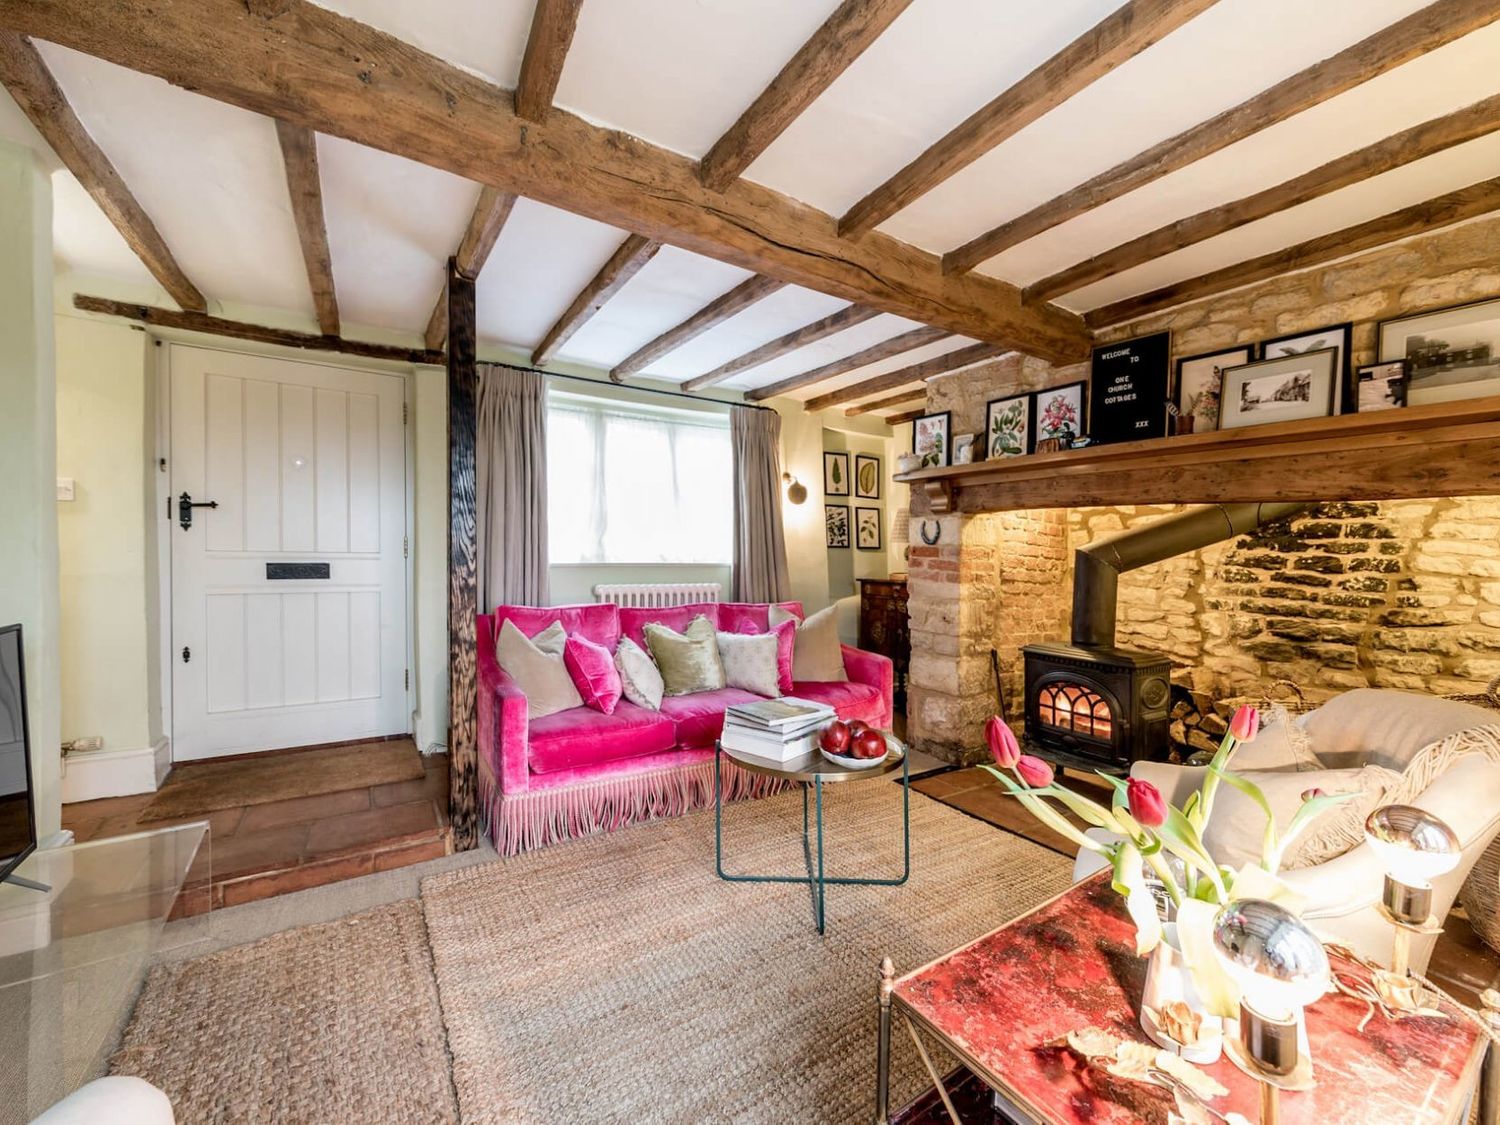 One Church Cottage - Cotswolds - 1091371 - photo 1